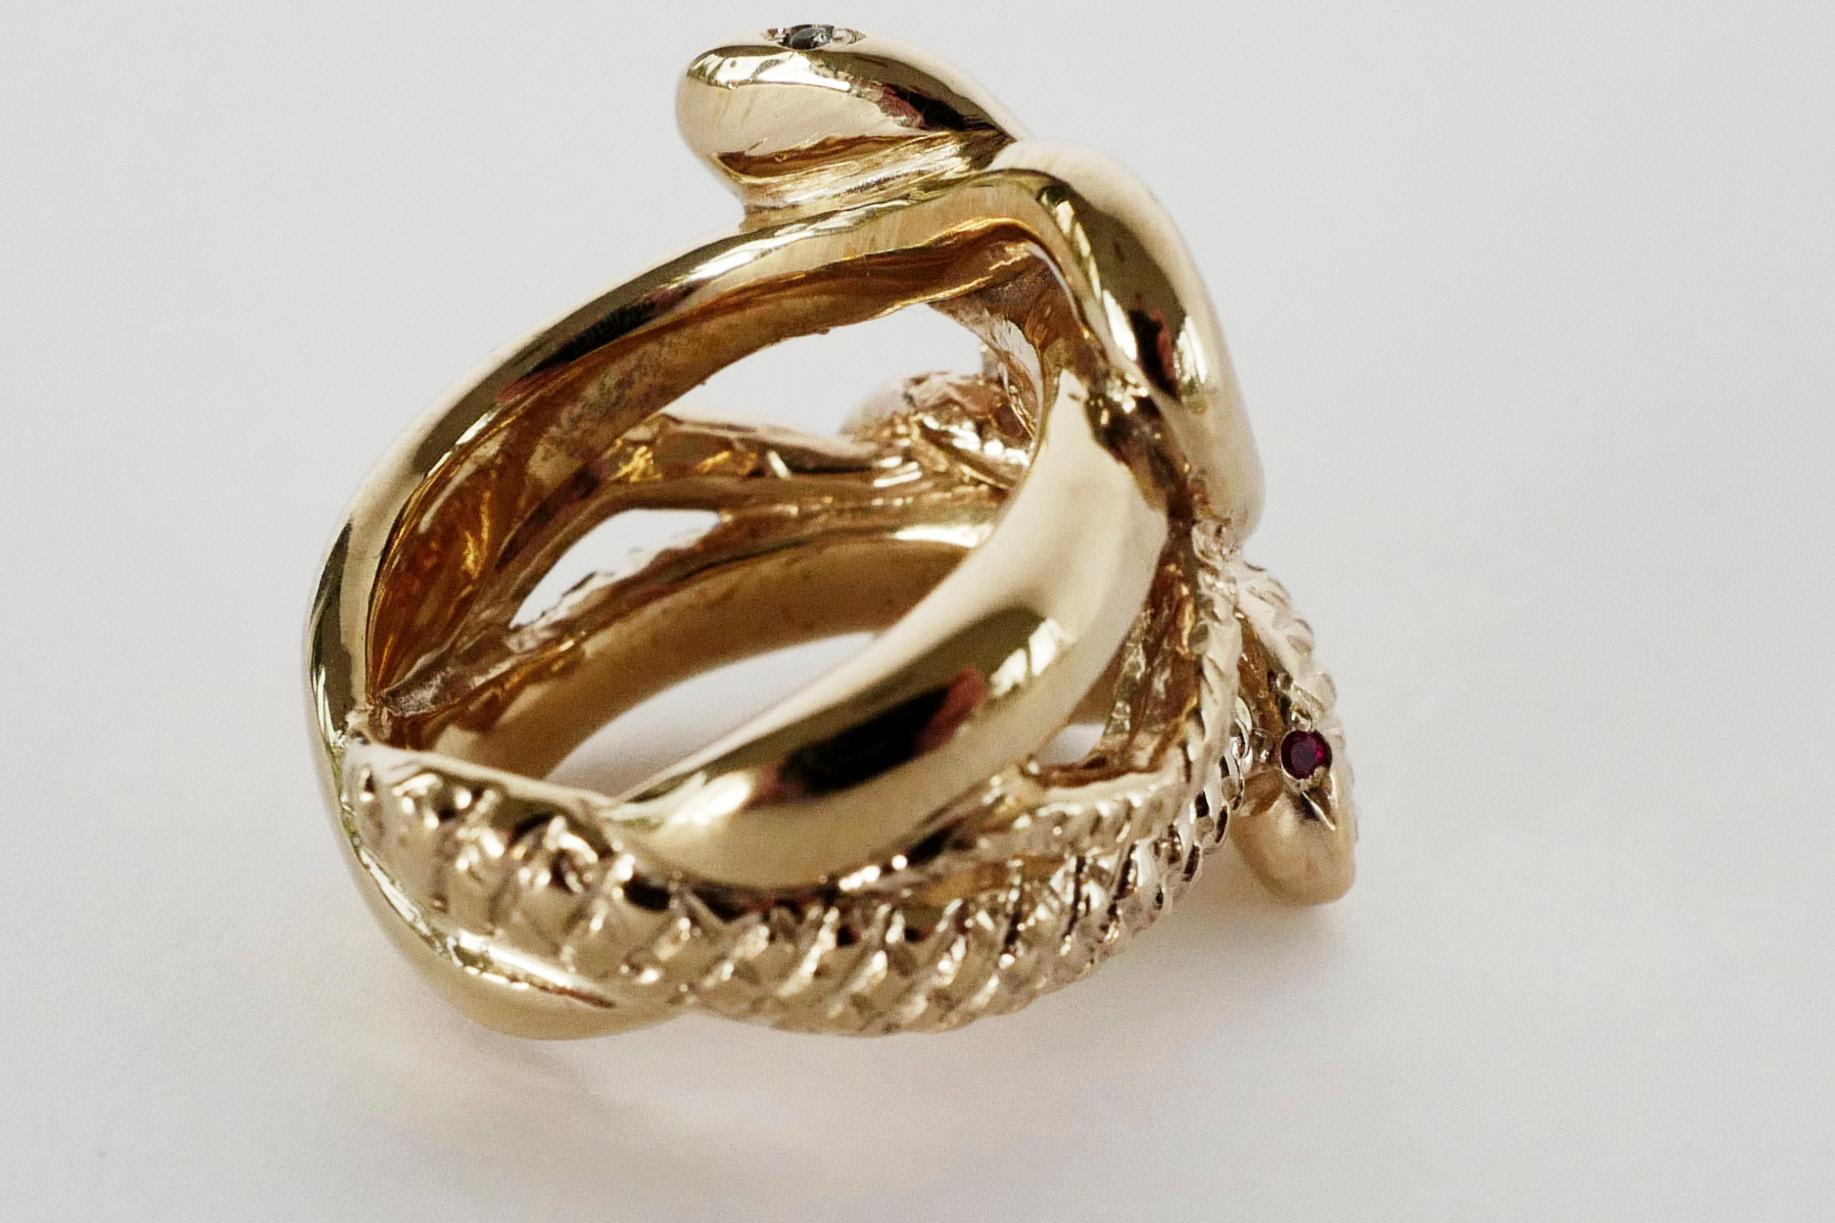 Snake Ring Gold Vermeil Emerald White Diamond Ruby Victorian Style J Dauphin For Sale 2